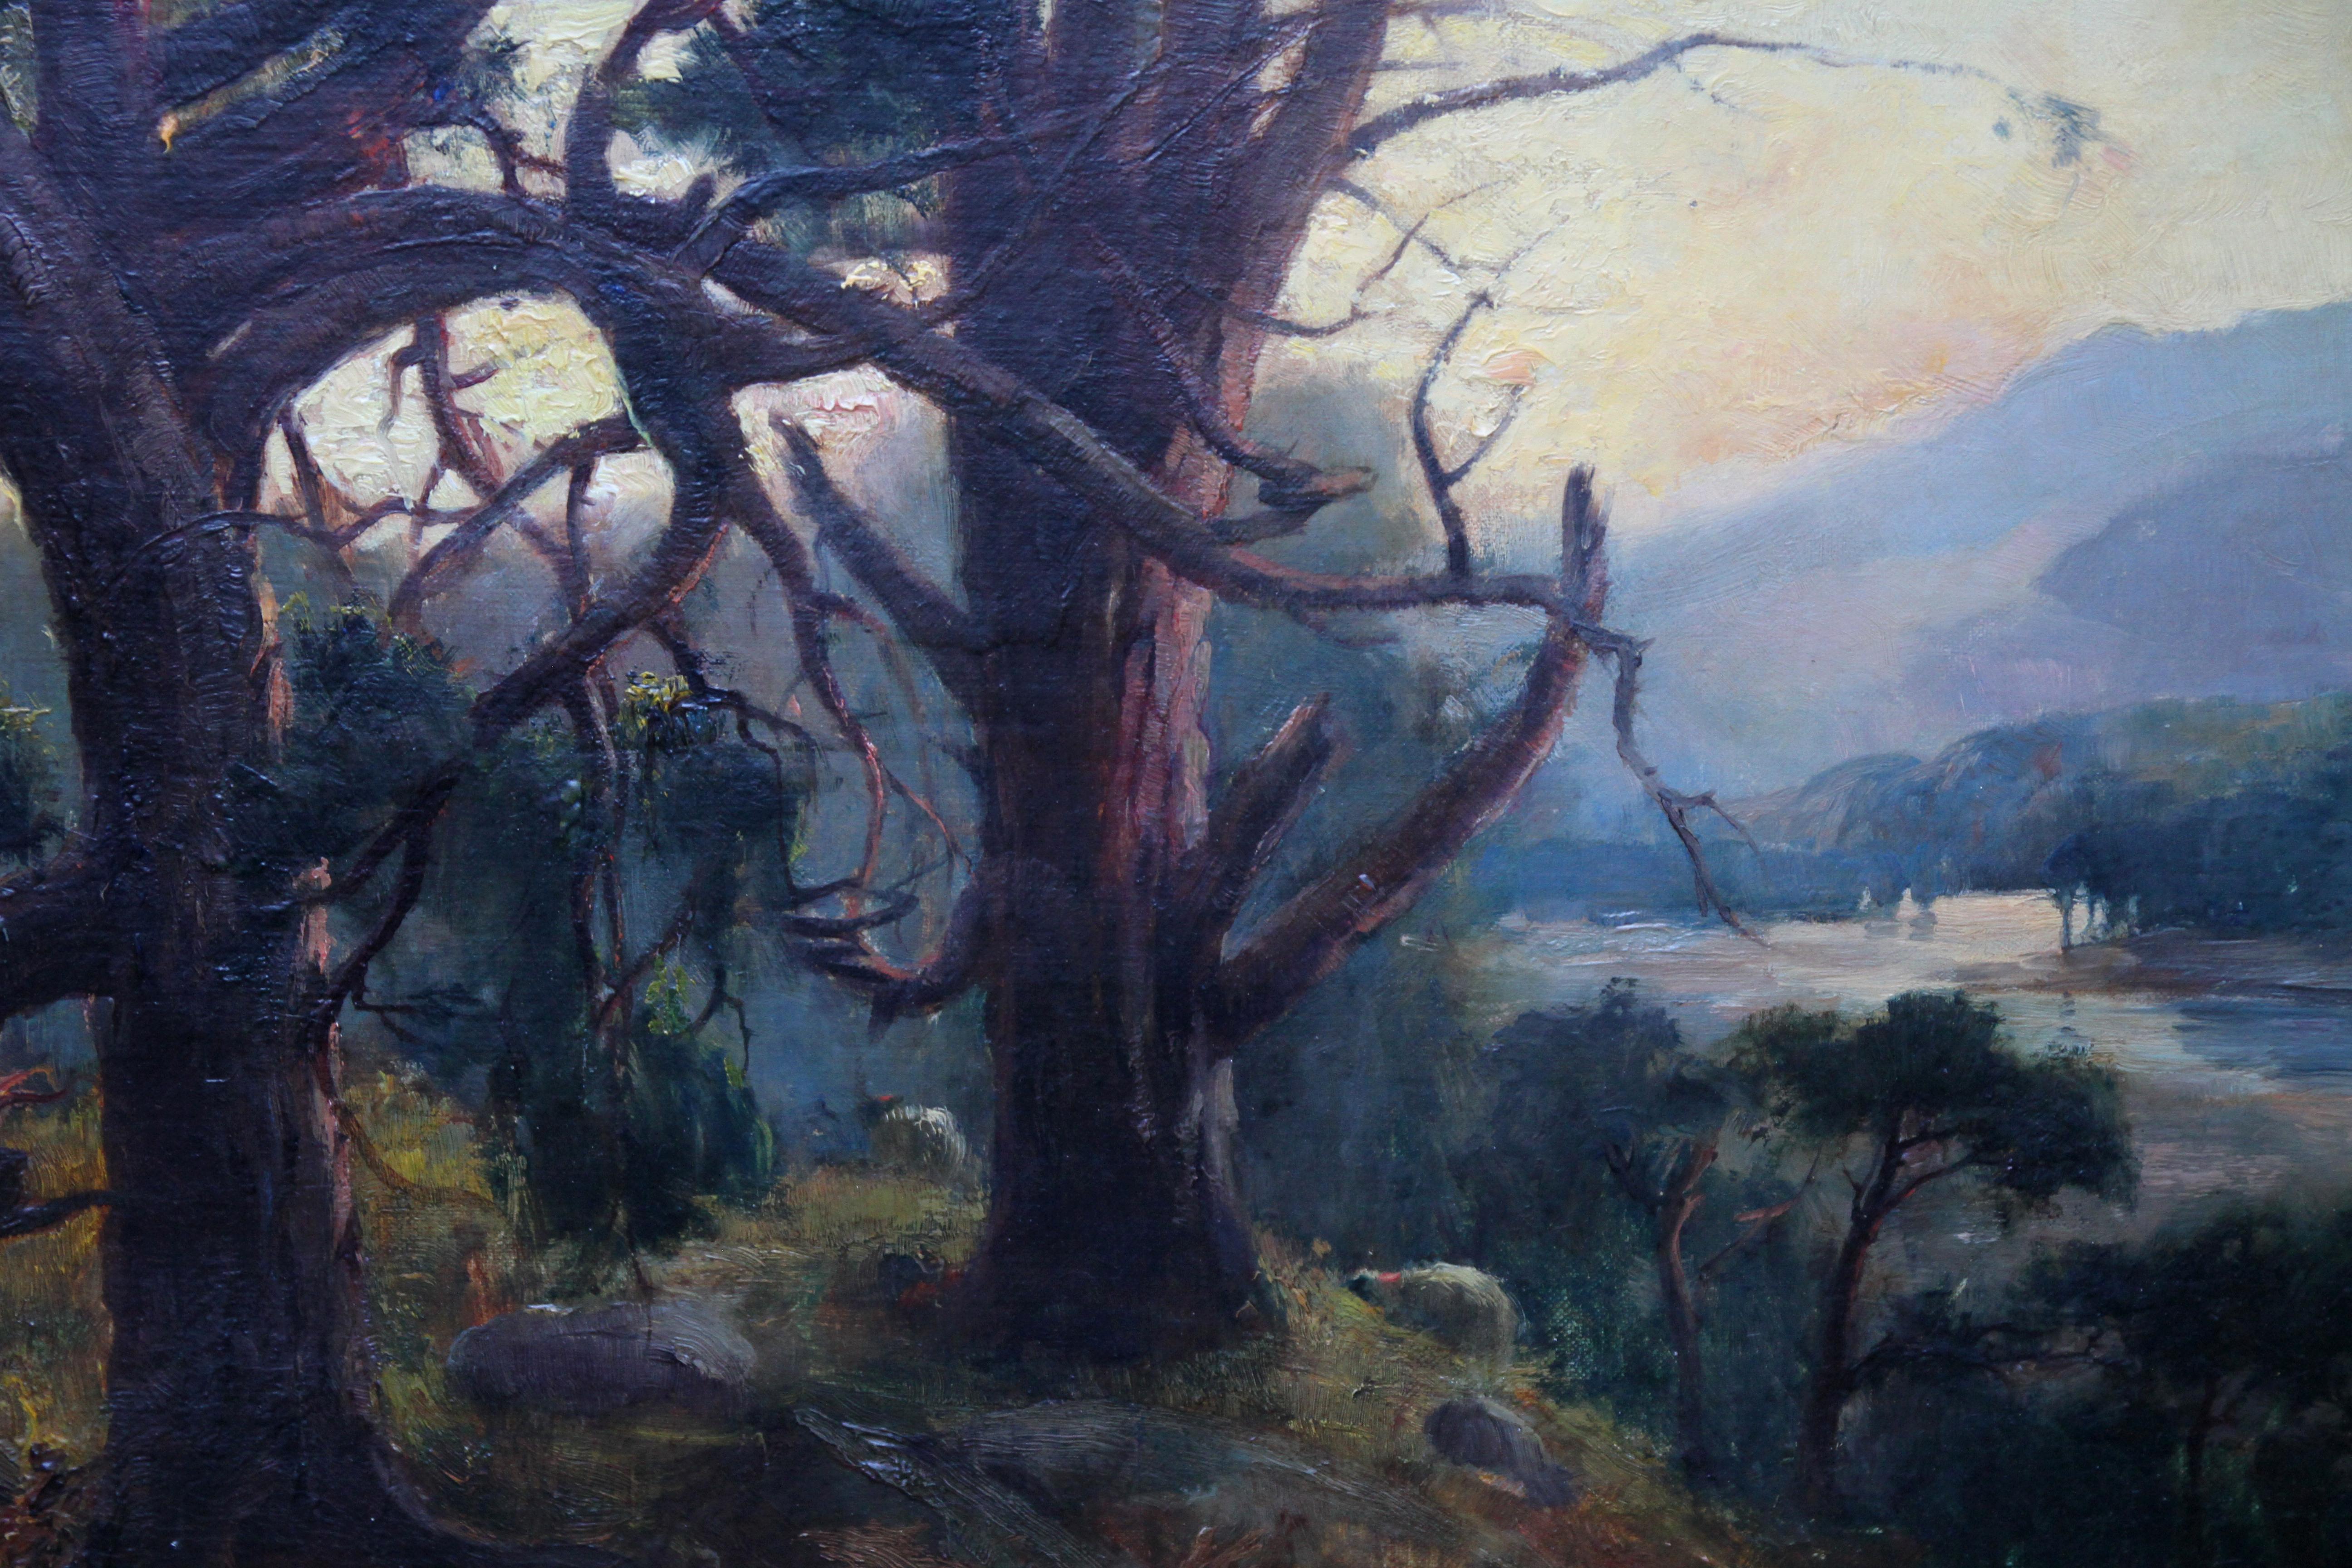 This charming atmospheric oil painting is by Scottish artist Henry Jobson Bell and was painted in 1904. The work depicts a sunset view from pine trees looking down onto a river and more hills in the background. The painting has a very soft